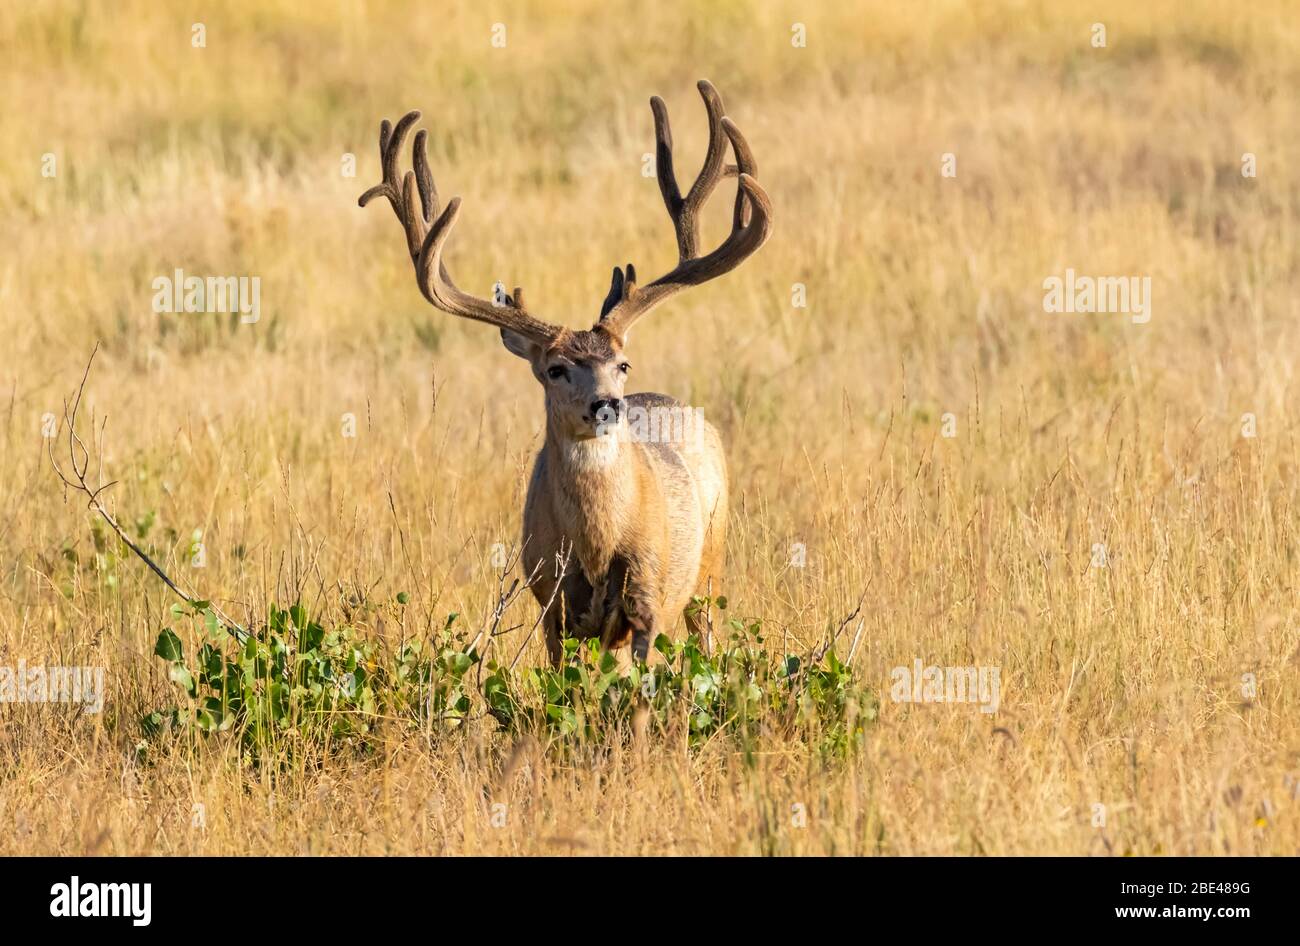 Mule deer (Odocoileus hemionus) stag with antlers standing in long grass looking at the camera; Steamboat Springs, Colorado, United States of America Stock Photo